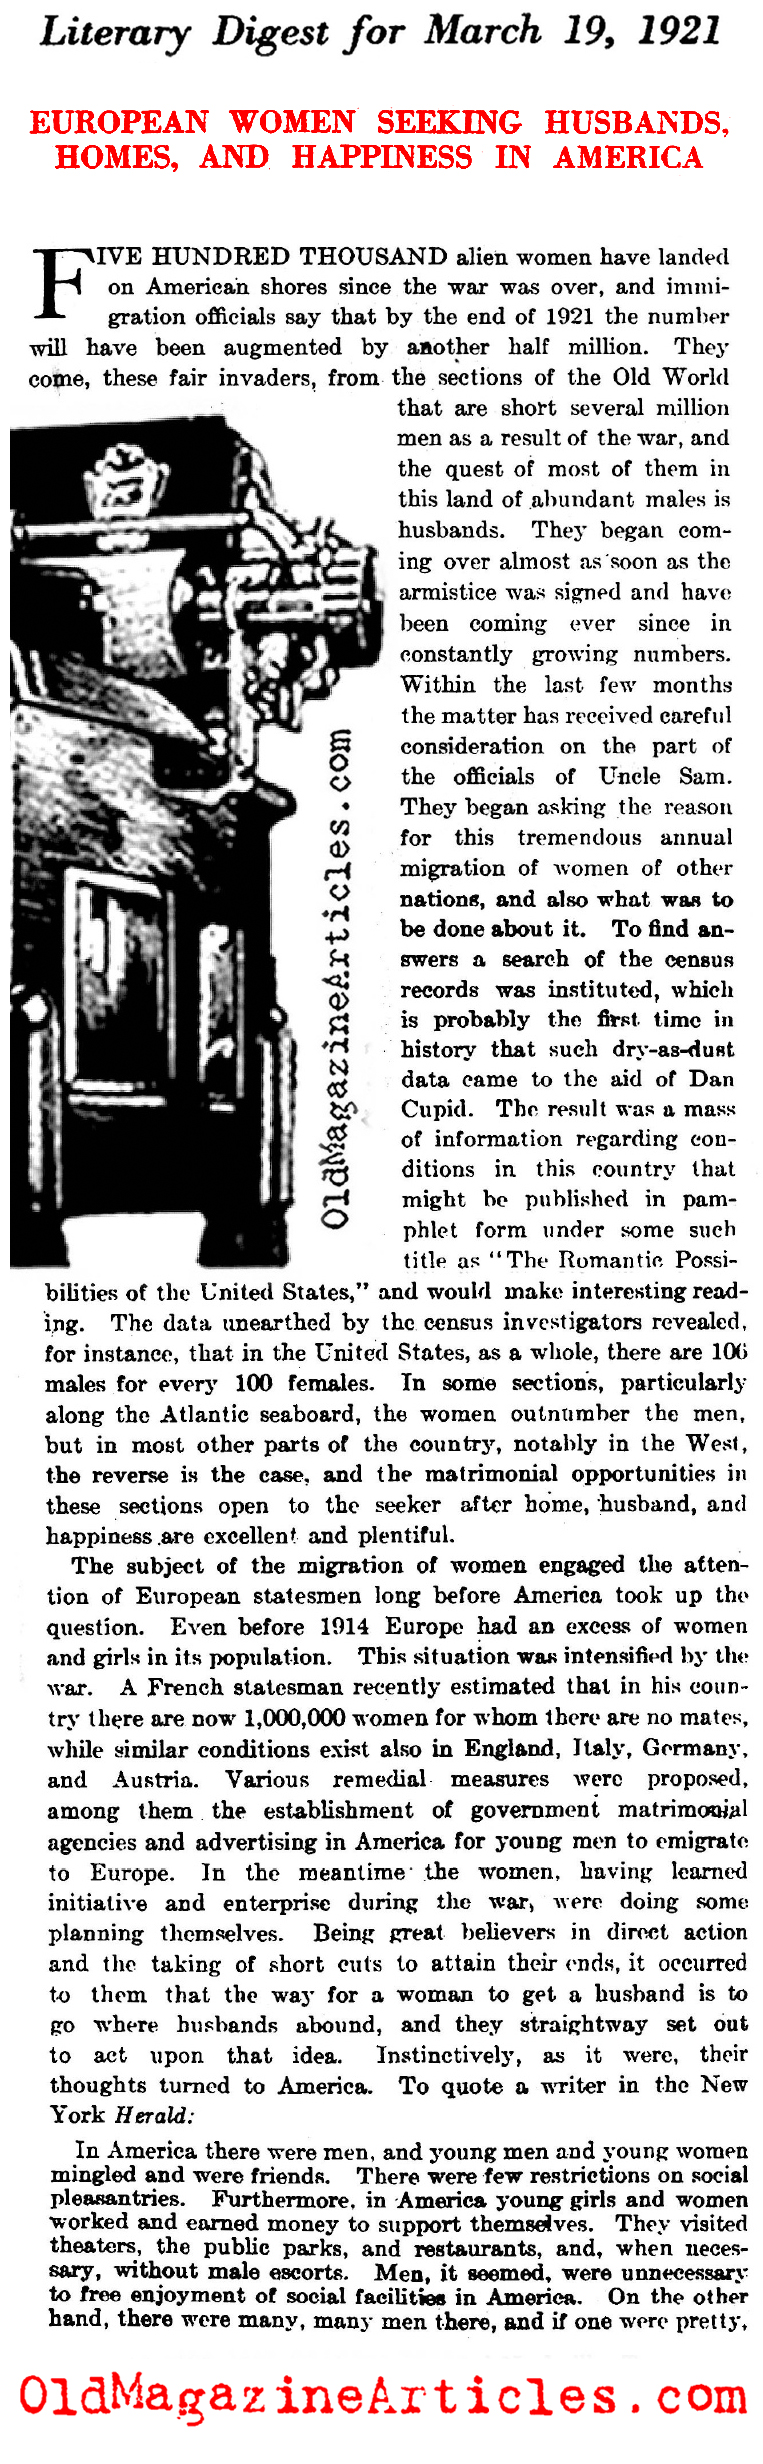 1921 Saw Many Single European Women Moving to the U.S. (Literary Digest, 1921)